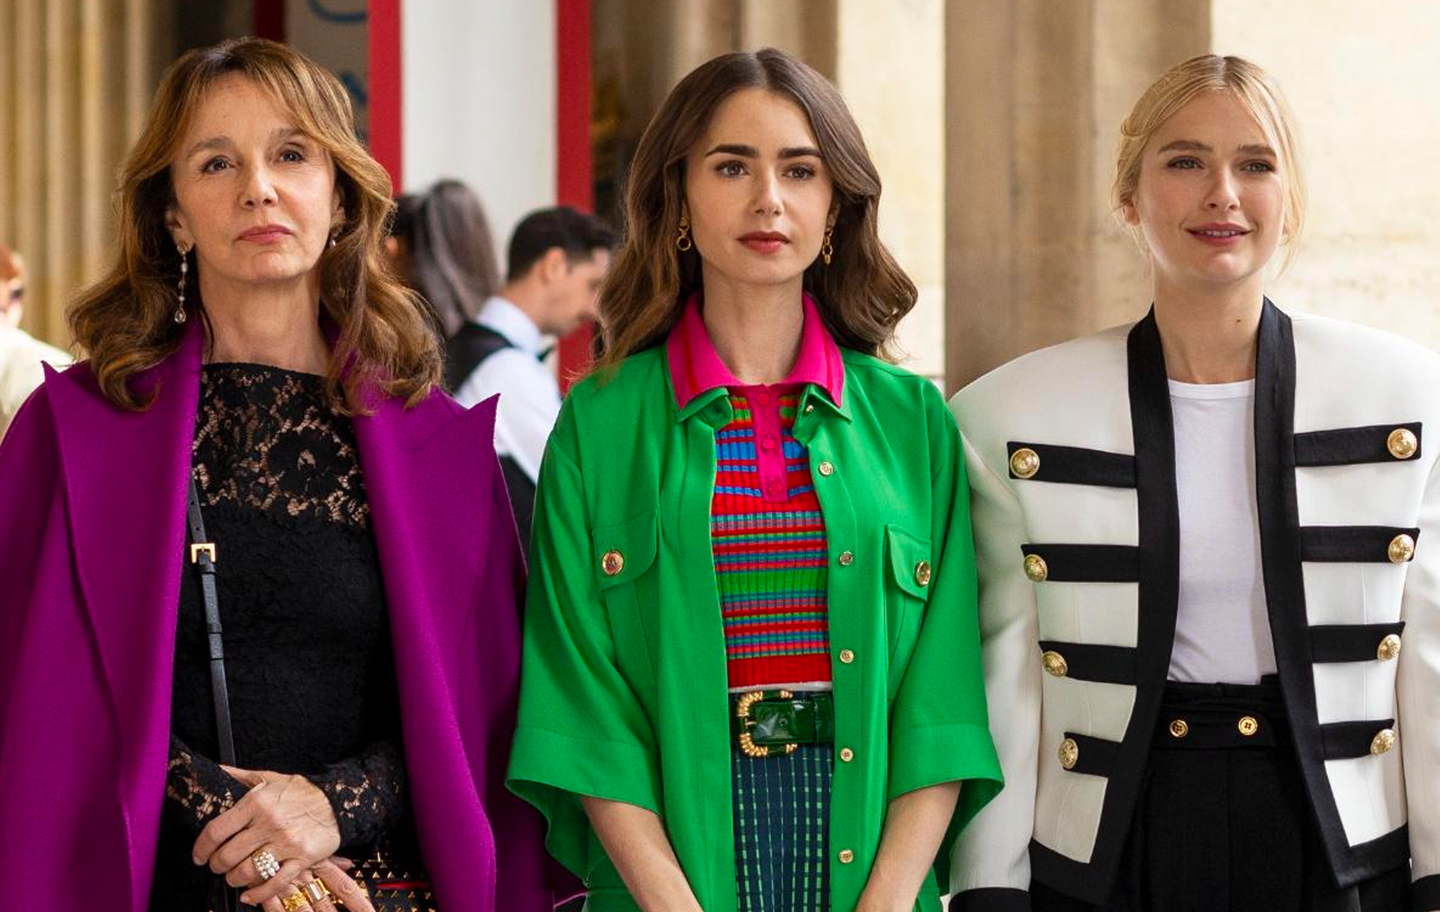 Three of Emily in Paris' stars. From left to right, Philippine Leroy-Beaulieu as Sylvie Grateau, Lily Collins as Emily Cooper and Camille Emilie Razat as Camille